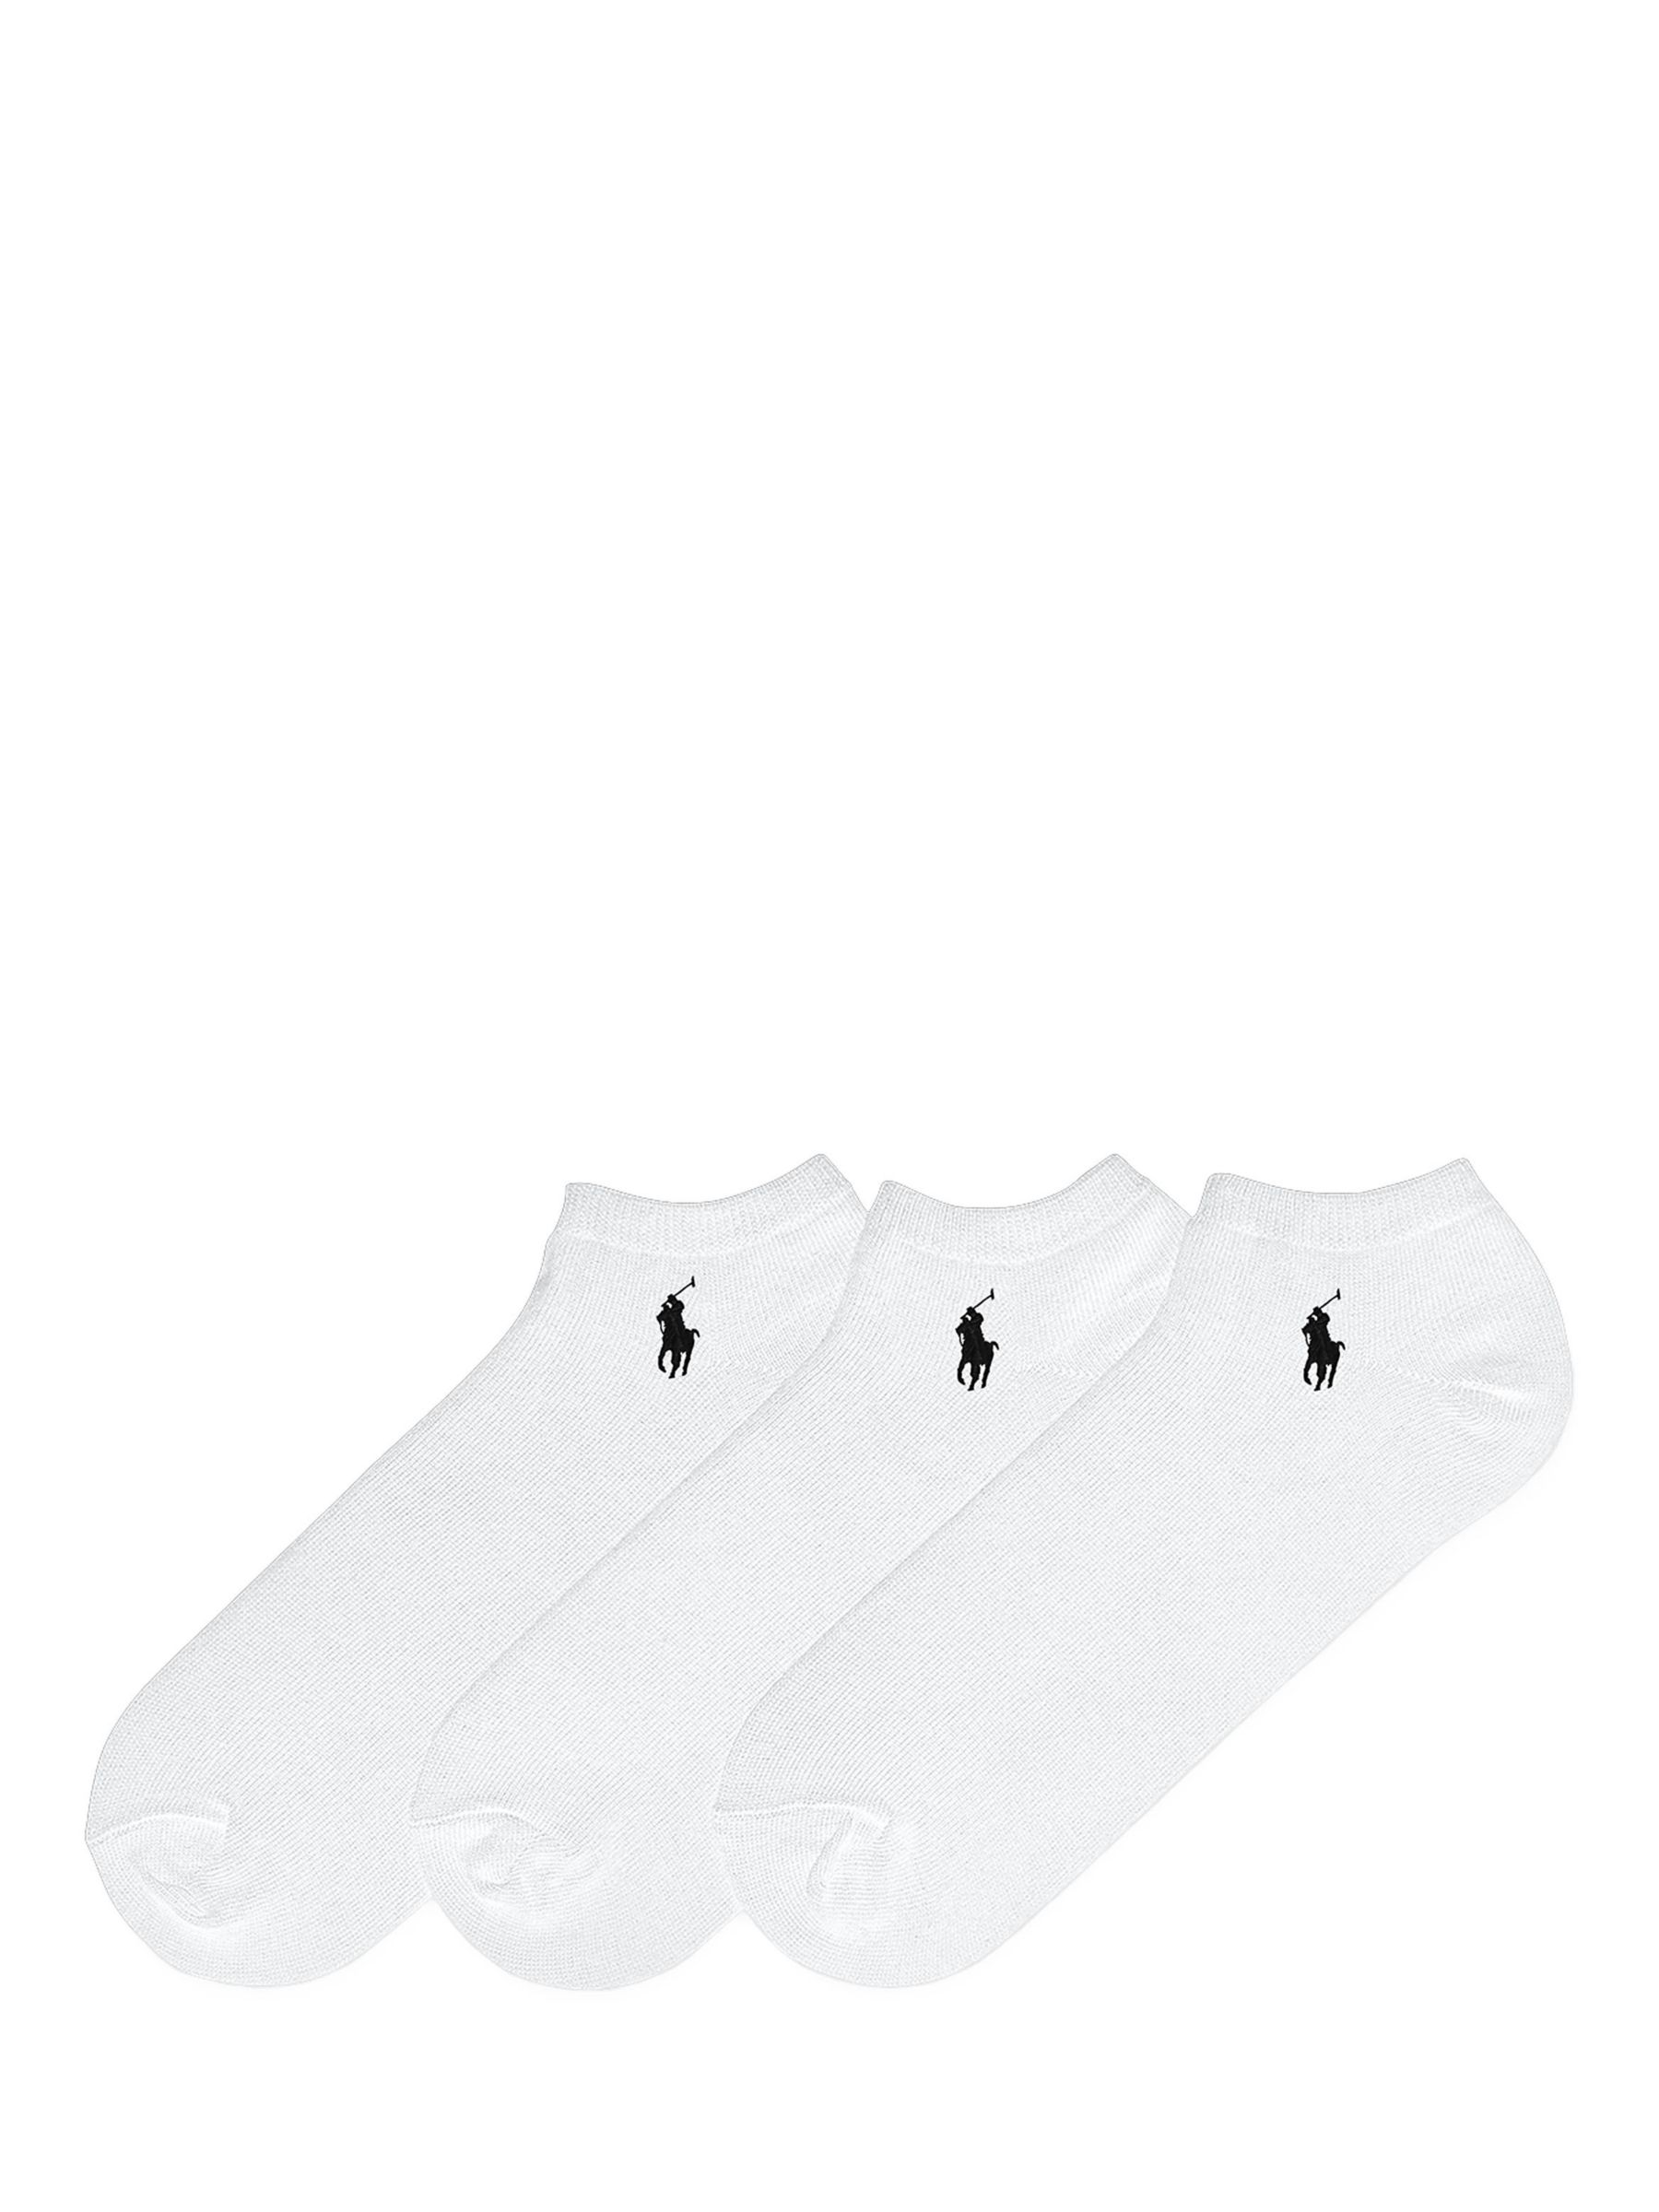 Buy Polo Ralph Lauren Low-Cut Ankle Socks, Pack of 3, White Online at johnlewis.com